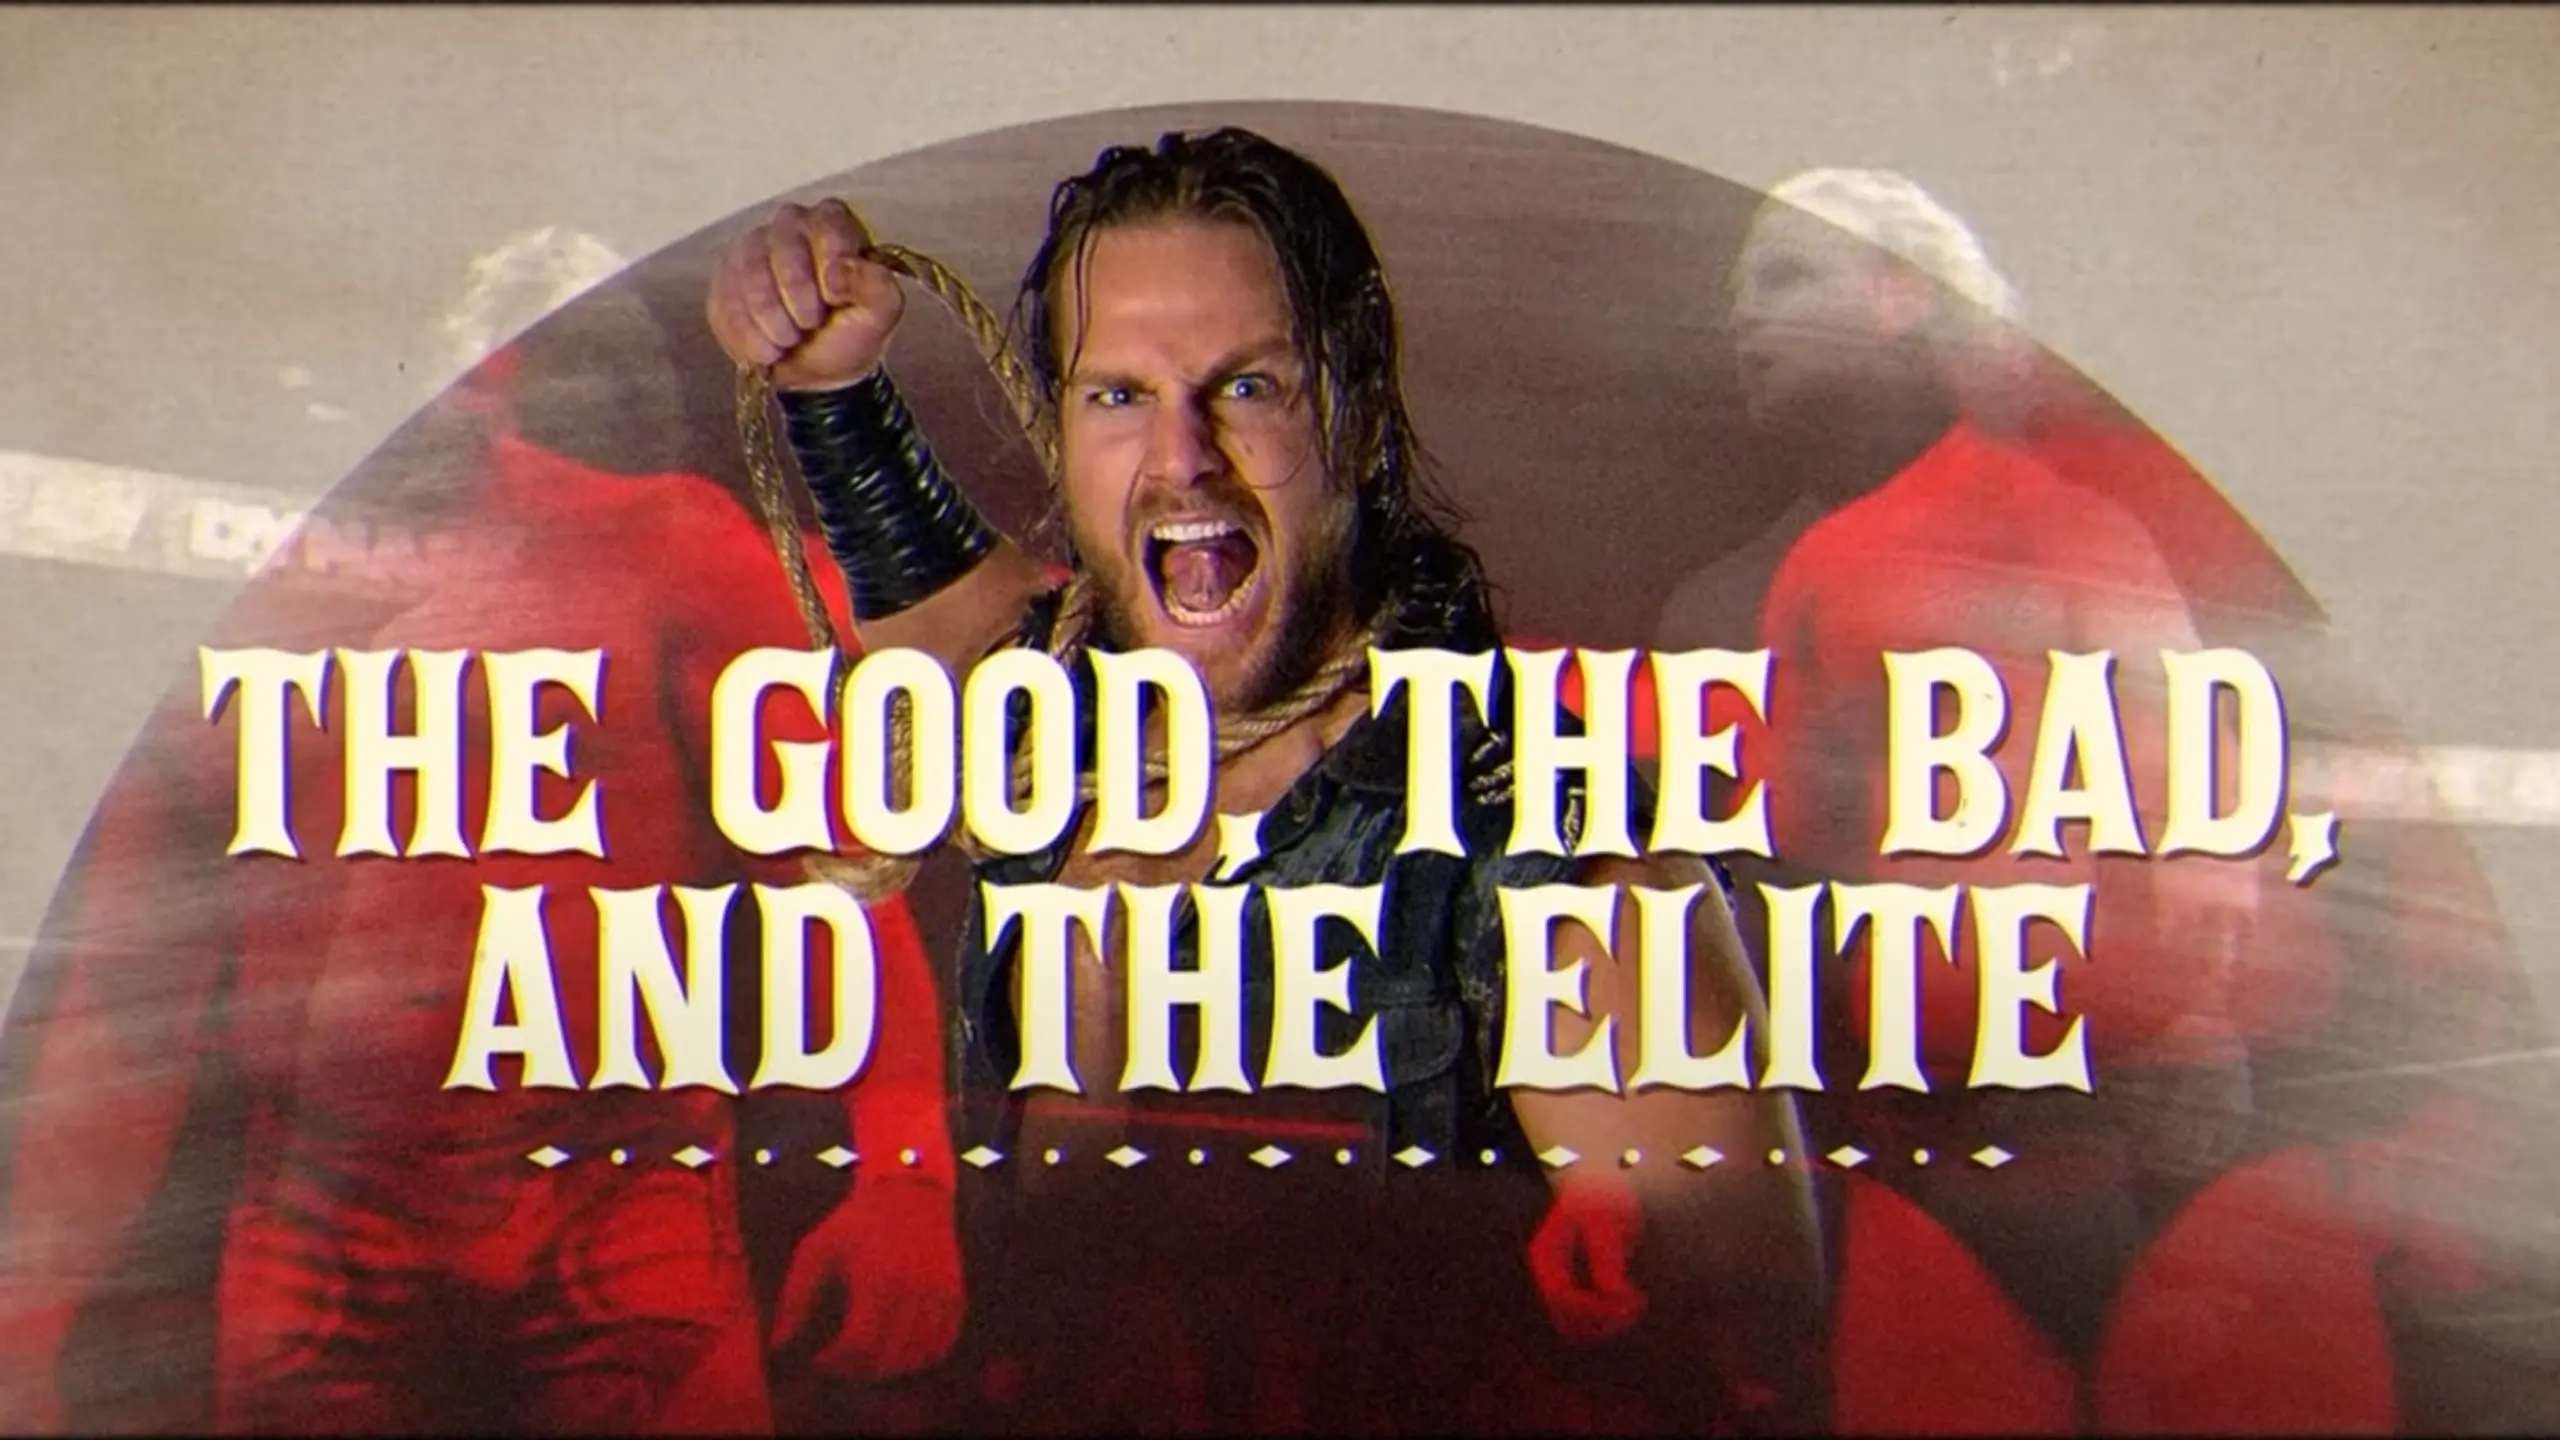 The Good, the Bad, and the Elite